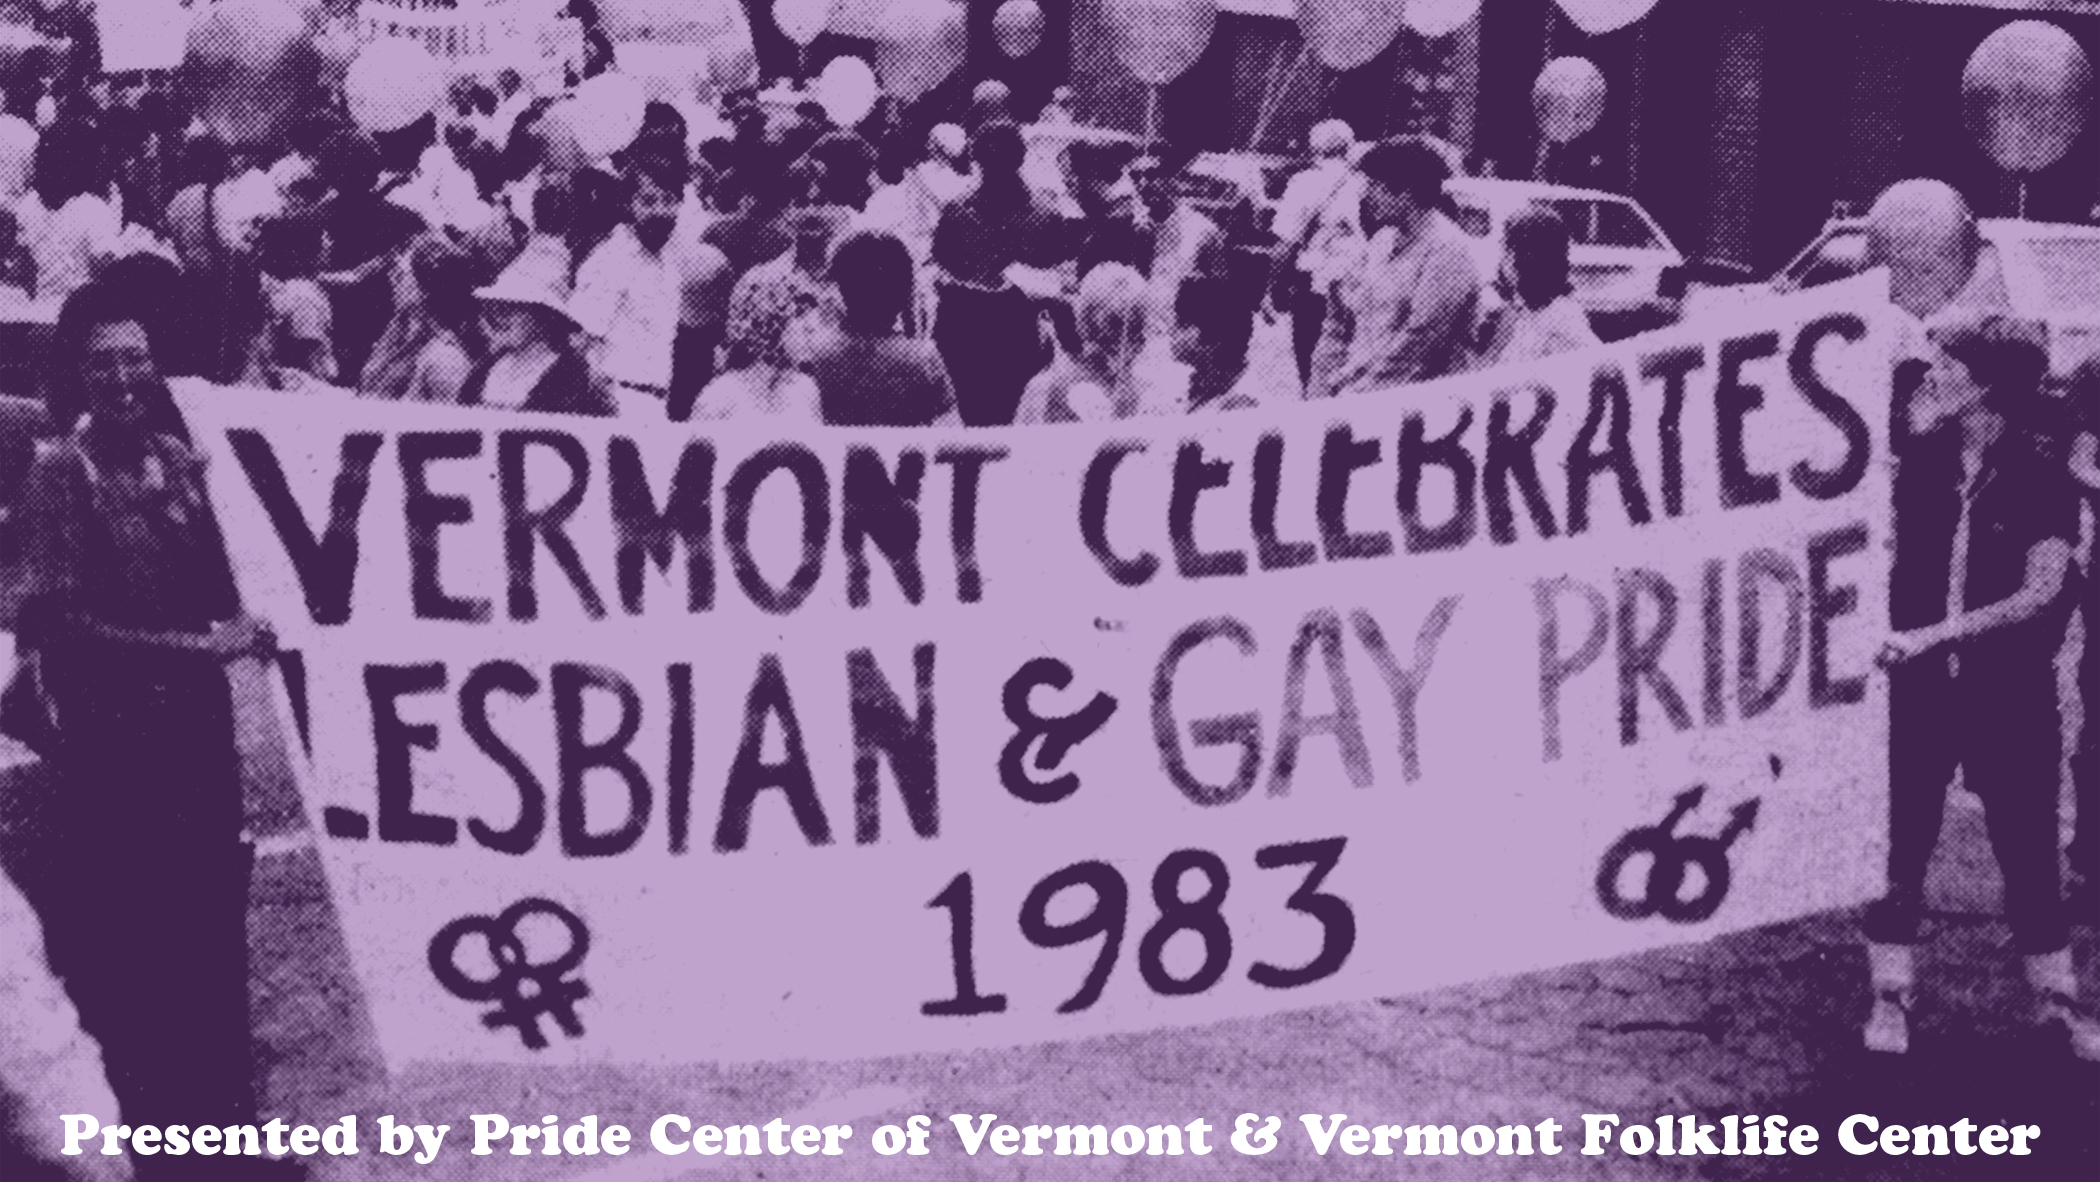 A purple tinted old photograph of a group of protestors carrying a large banner that says Vermont Celebrates Lesbian & Gay Pride 1983, and a footer that says presented by Pride Center of Vermont & Vermont Folklife Center